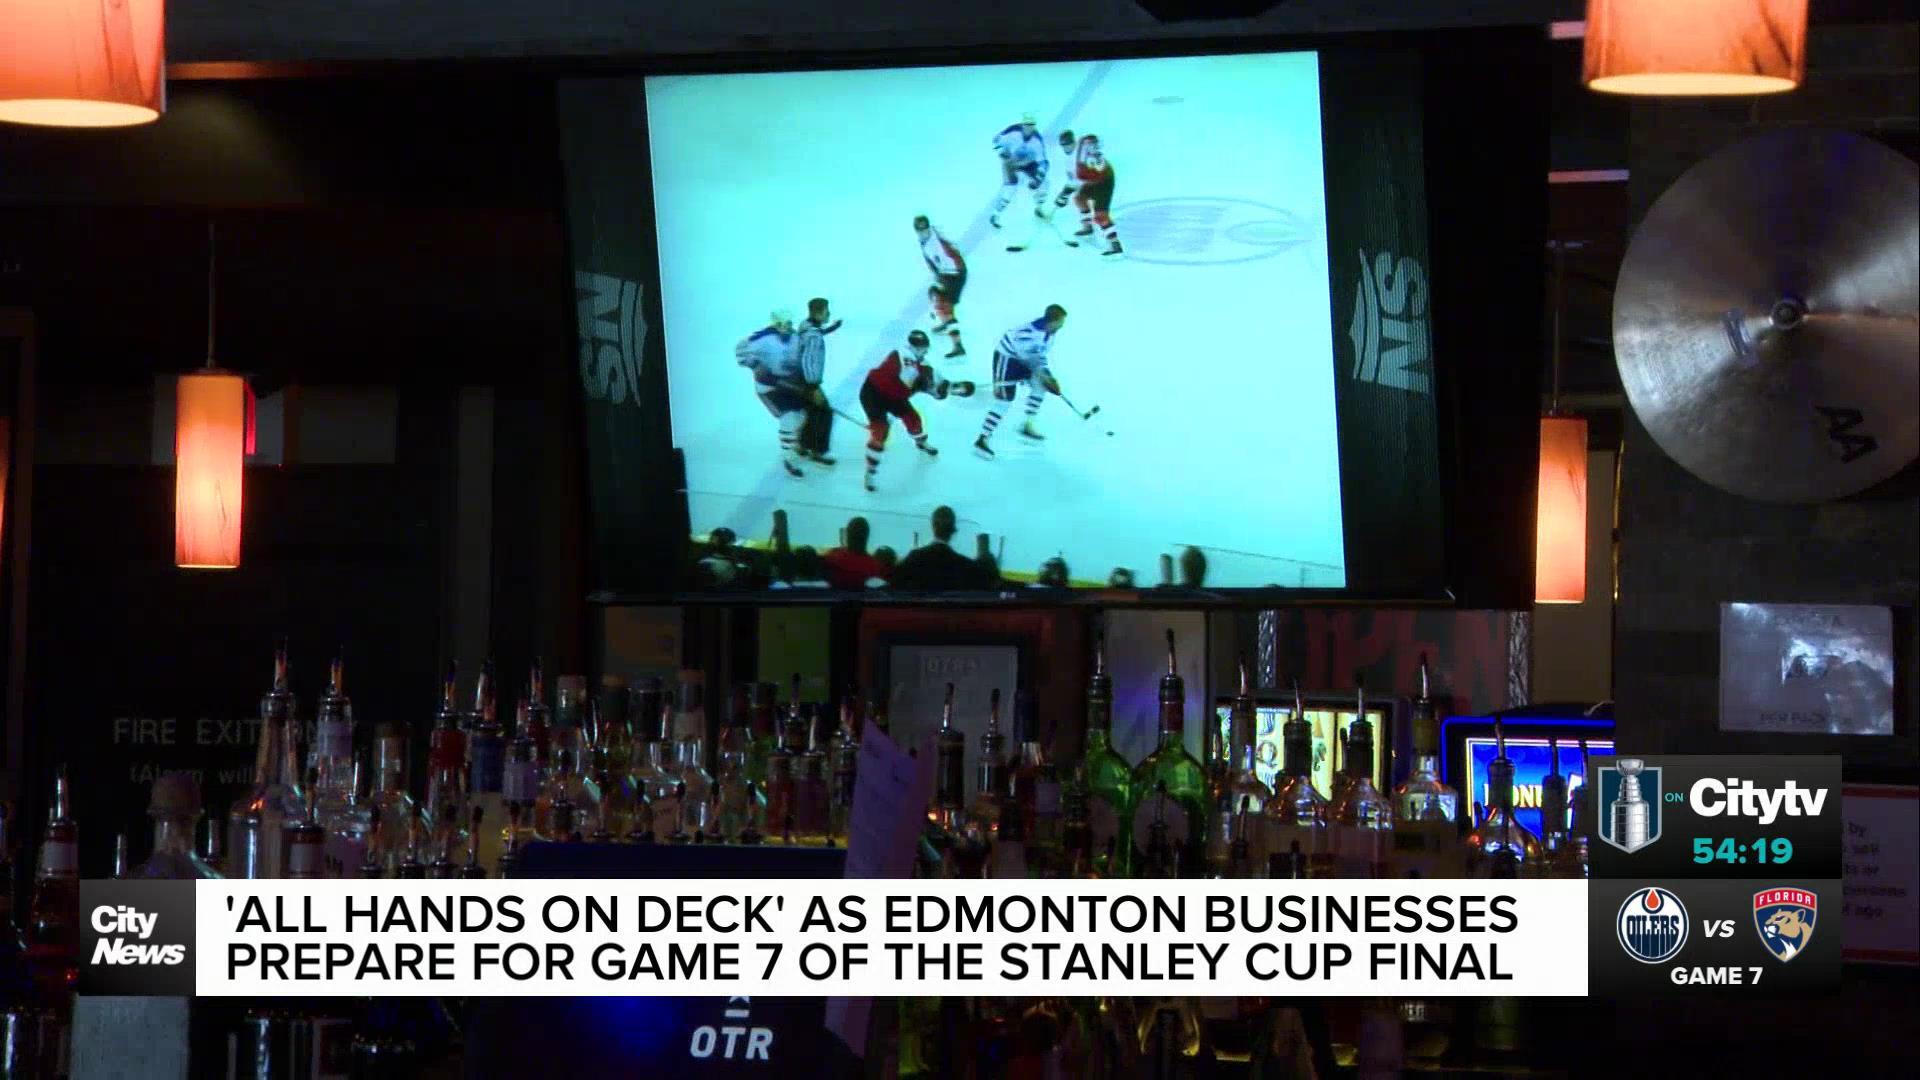 Edmonton businesses gear up for Game 7